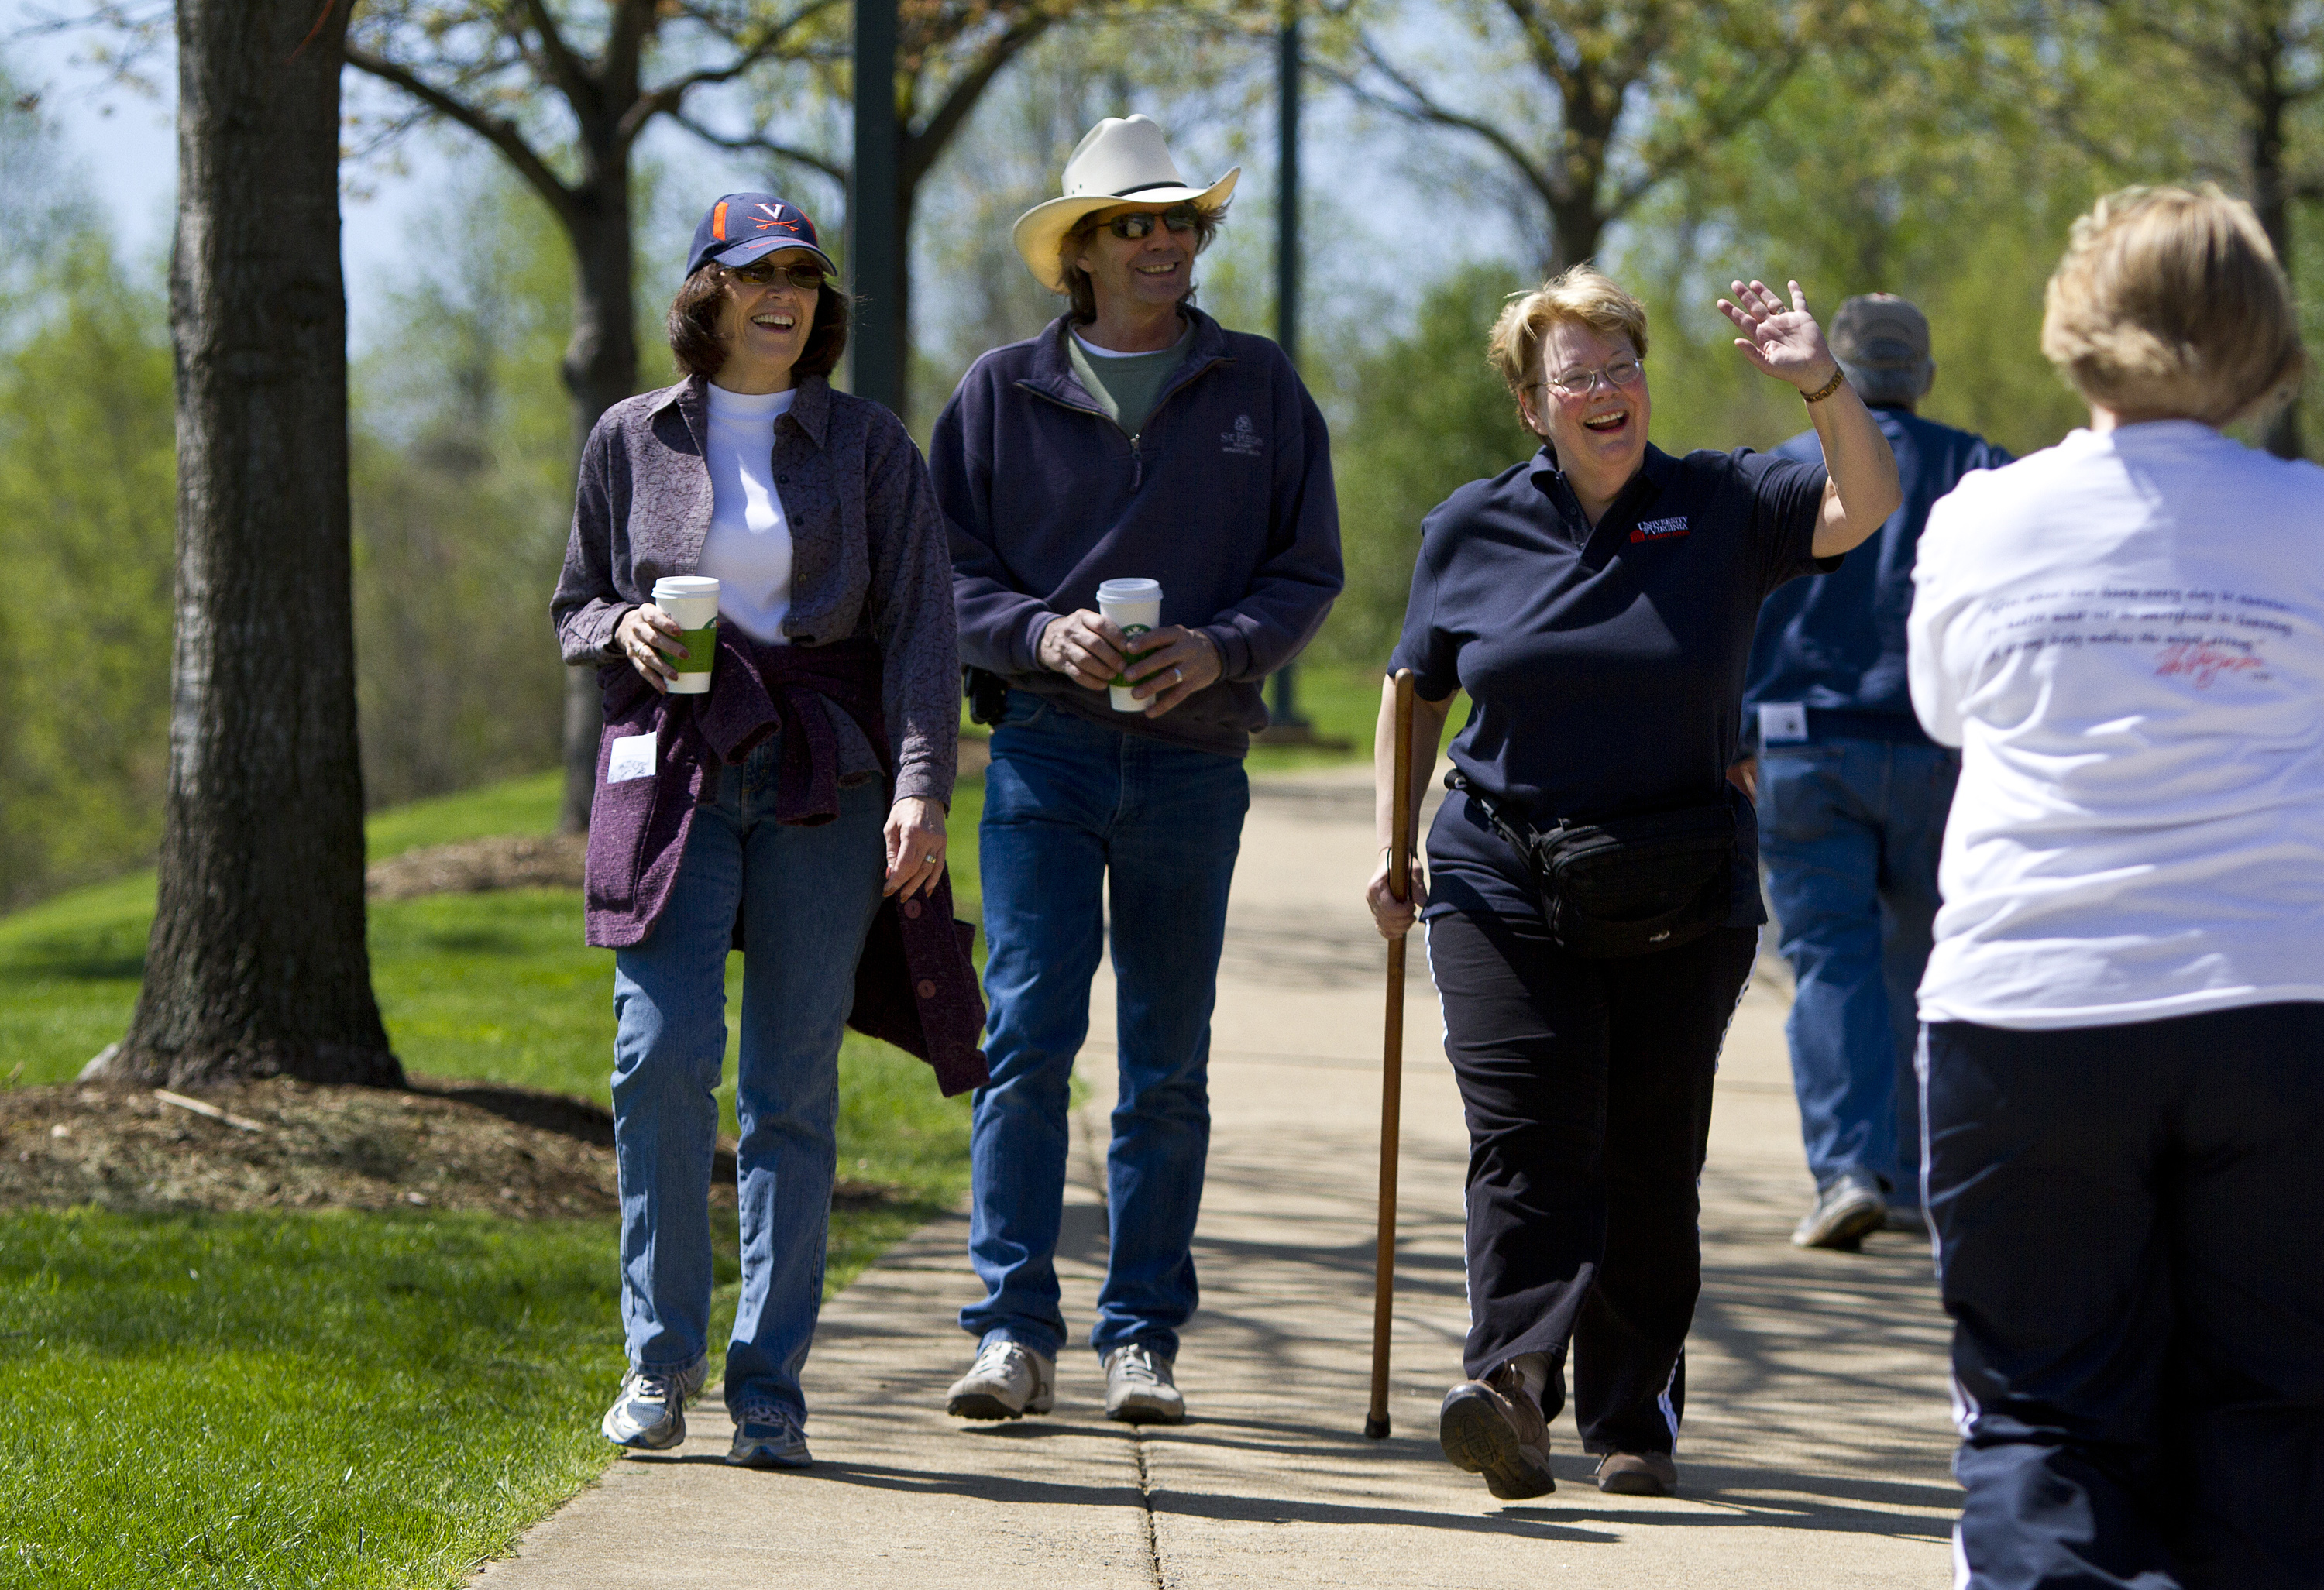 People walking on a sidewalk left to right: Susan Carkeek, her husband, Kelly, and President Sullivan 